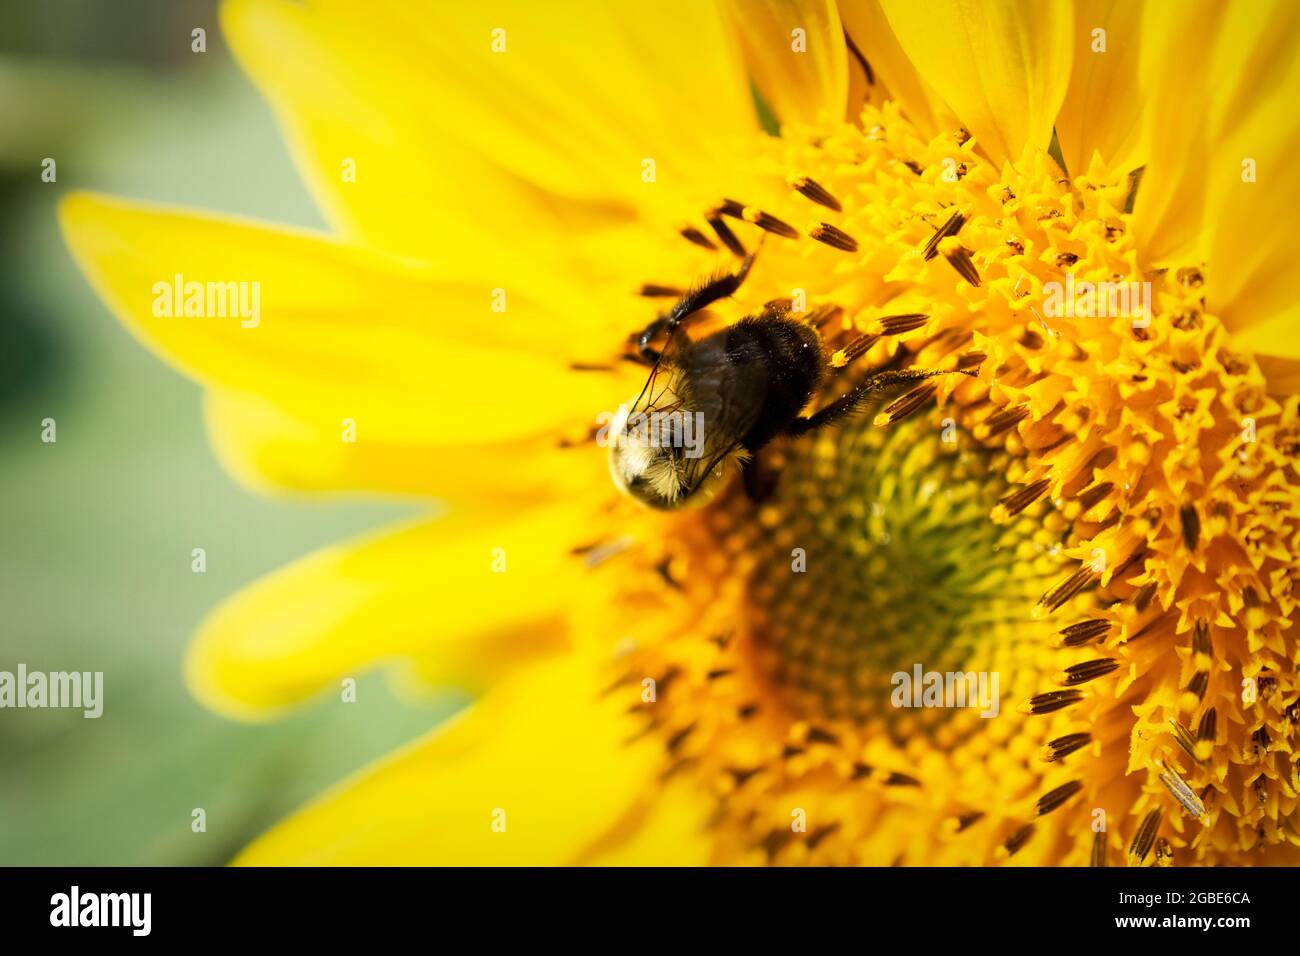 A bumble bee works on collecting pollen on a sunflower.  Close up view. Stock Photo